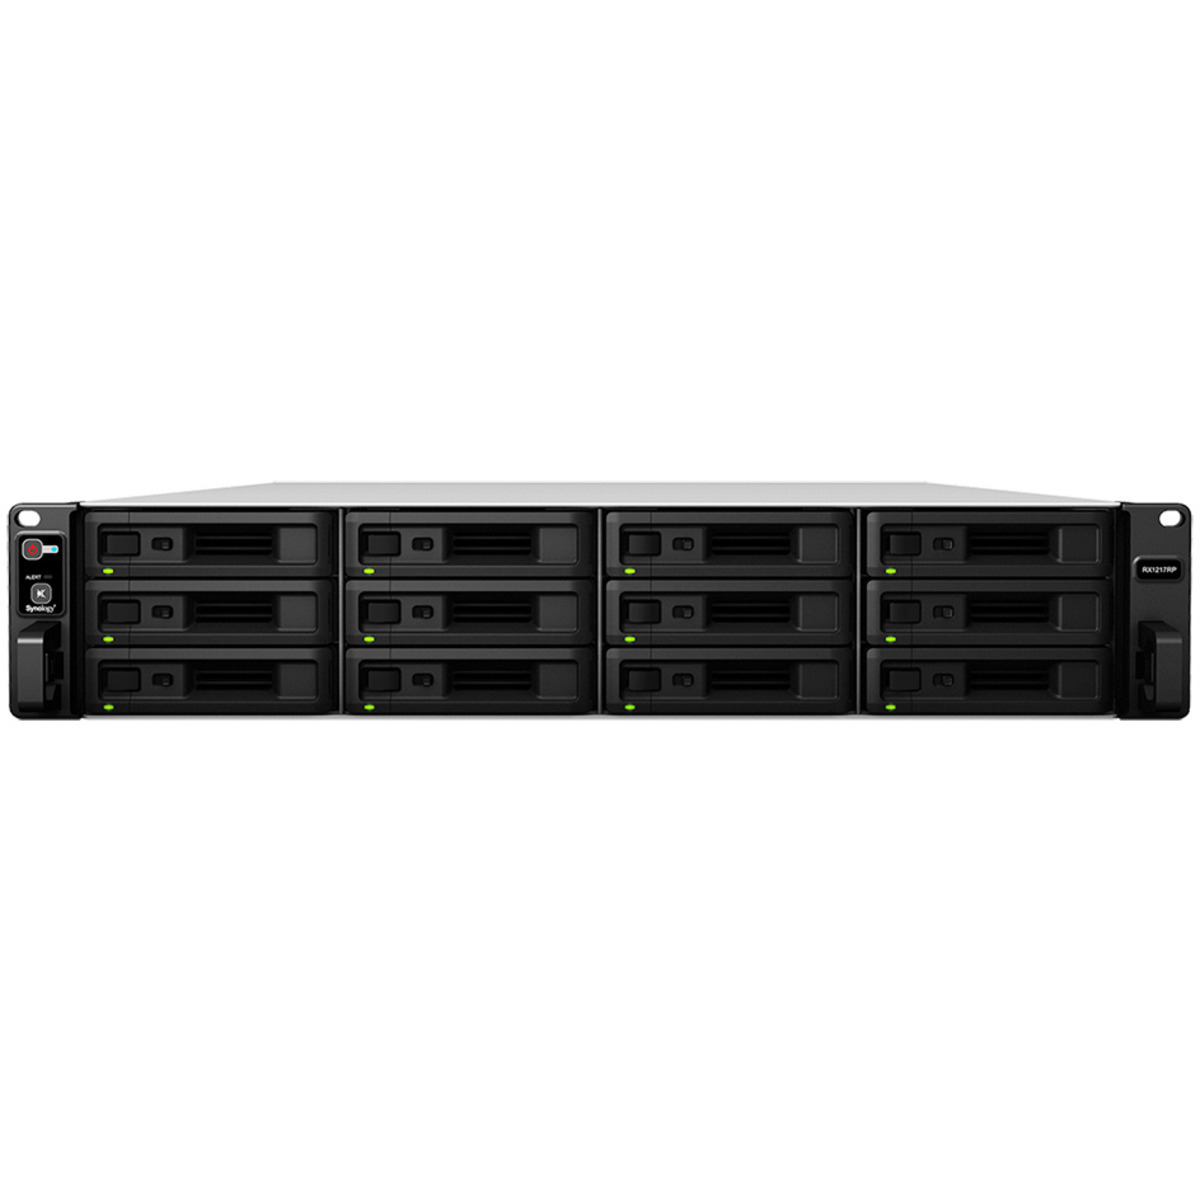 Synology RX1217 External Expansion Drive 24tb 12-Bay RackMount Large Business / Enterprise Expansion Enclosure 12x2tb Samsung 870 EVO MZ-77E2T0BAM 2.5 560/530MB/s SATA 6Gb/s SSD CONSUMER Class Drives Installed - Burn-In Tested RX1217 External Expansion Drive